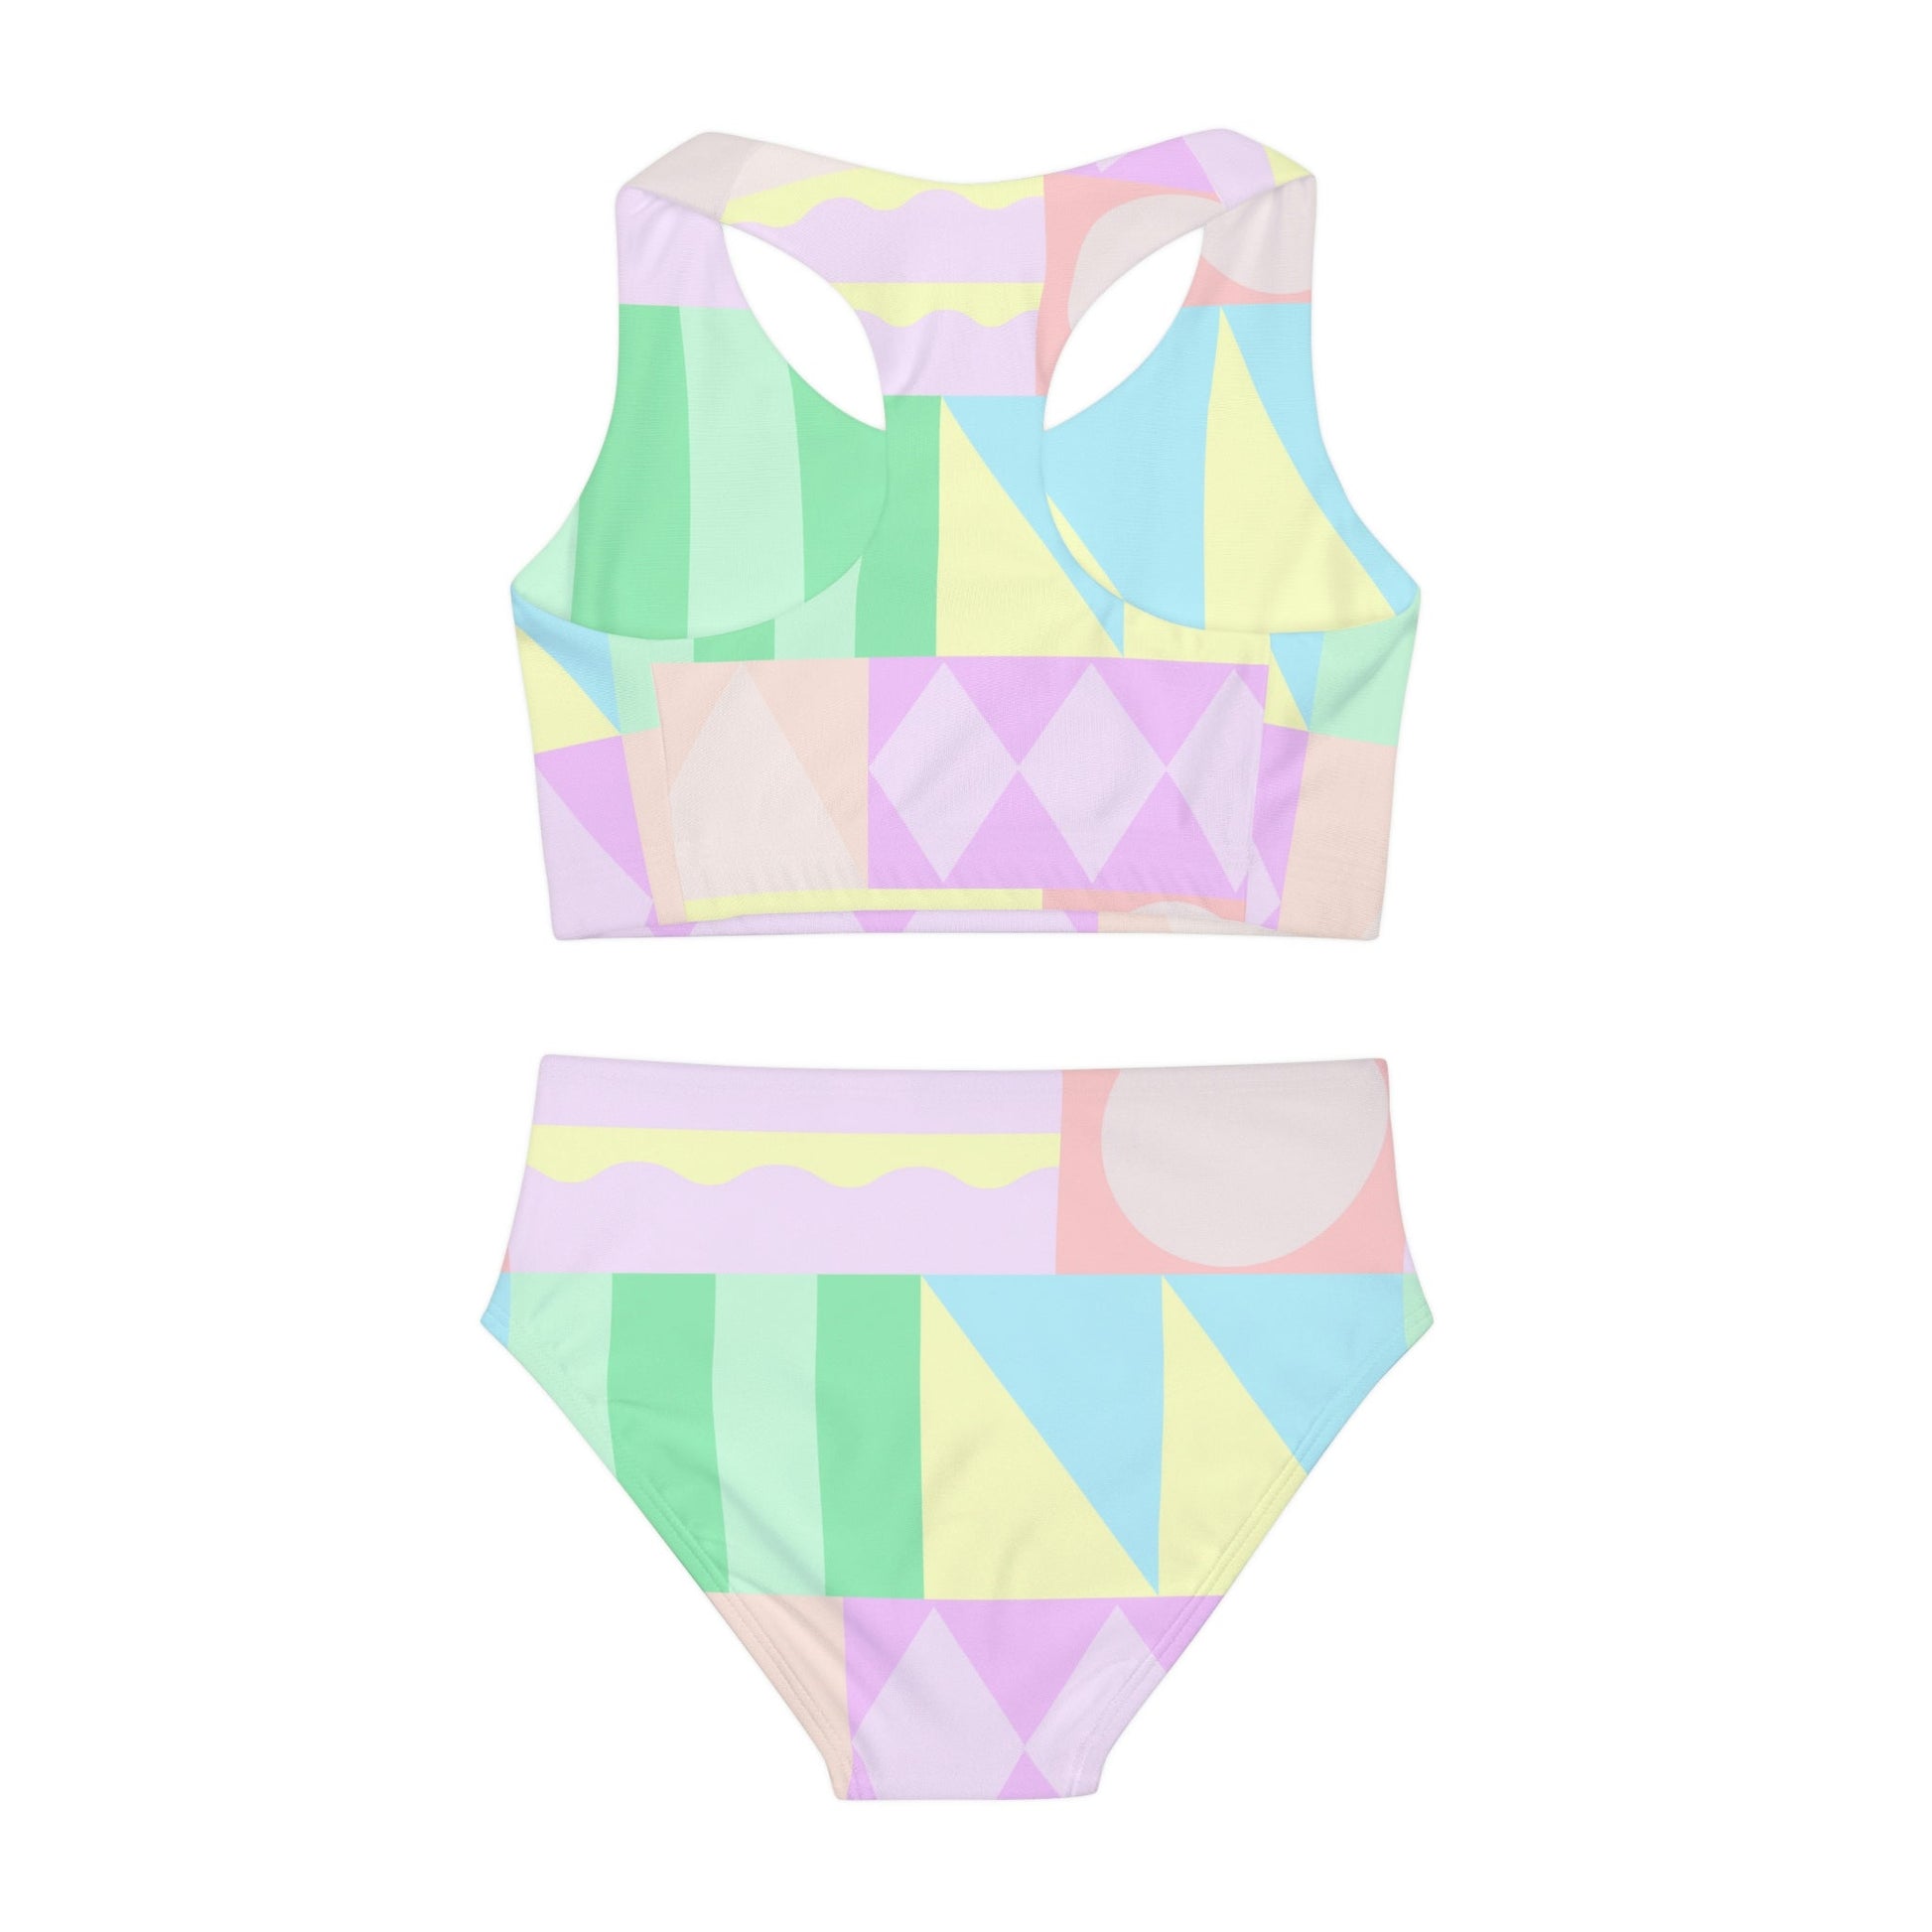 Small World Girls Two Piece Swimsuit All Over PrintAOPAOP Clothing#tag4##tag5##tag6#